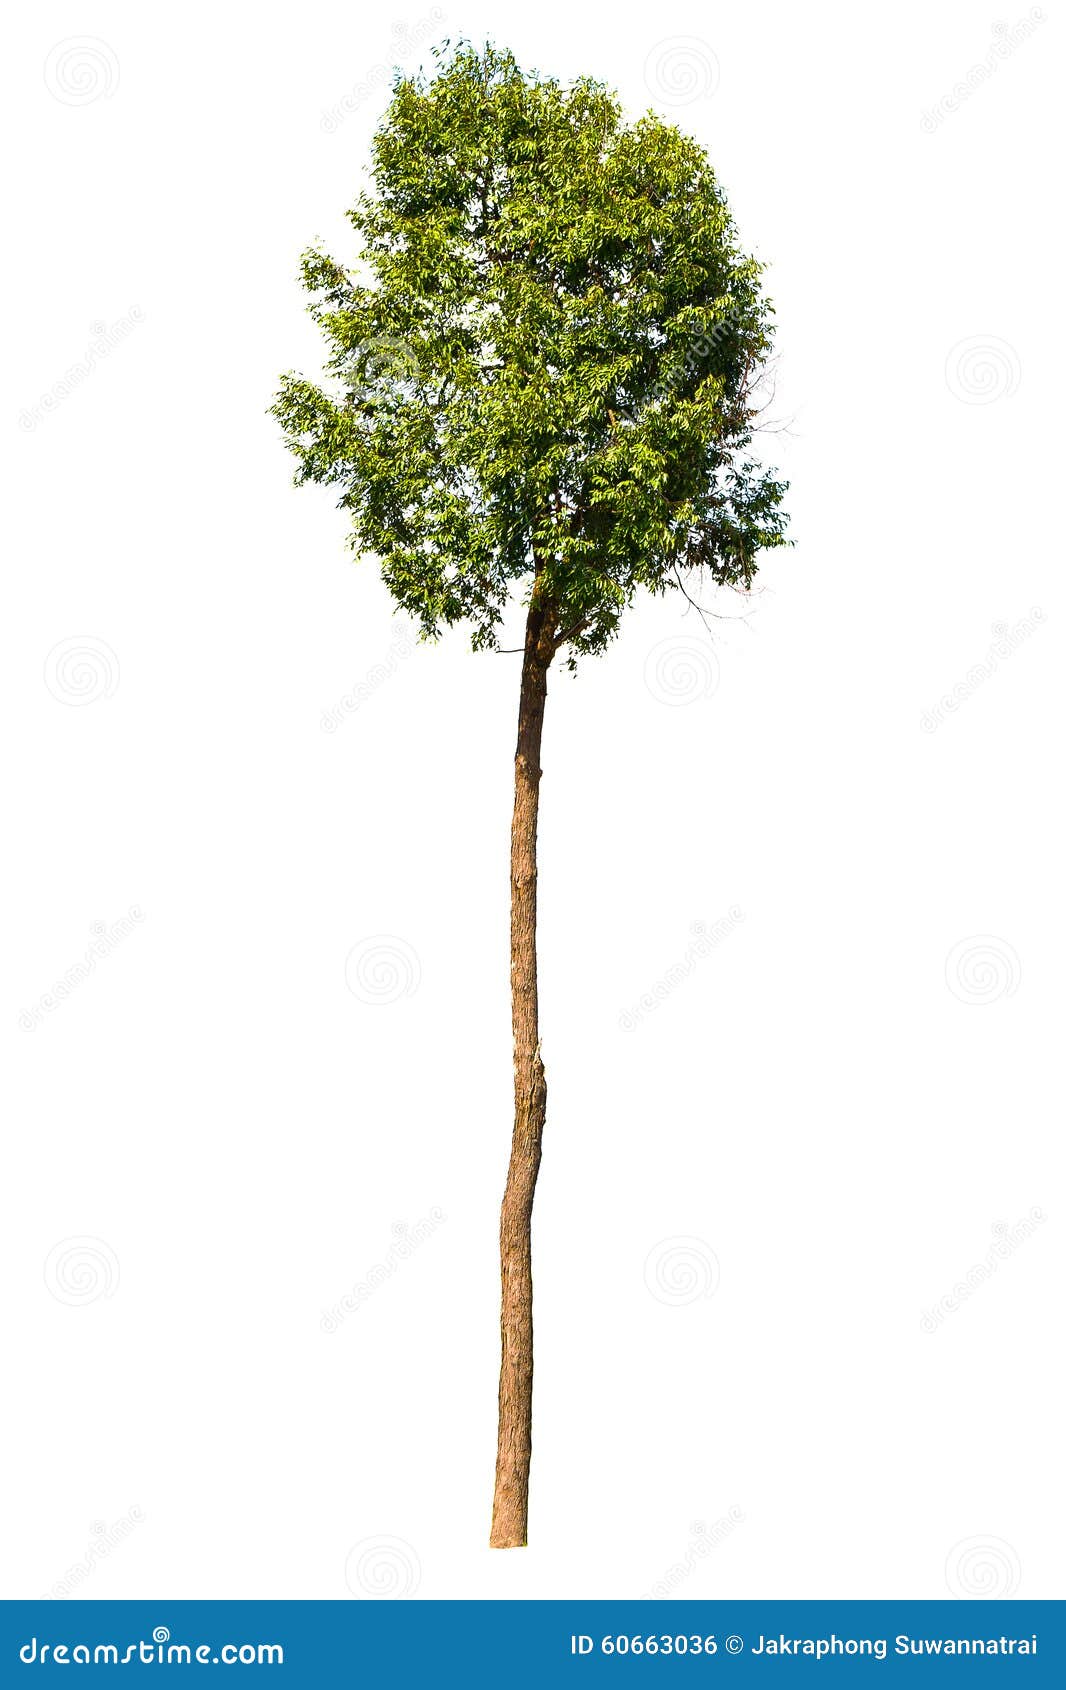 27 219 Tall Tree White Background Photos Free Royalty Free Stock Photos From Dreamstime